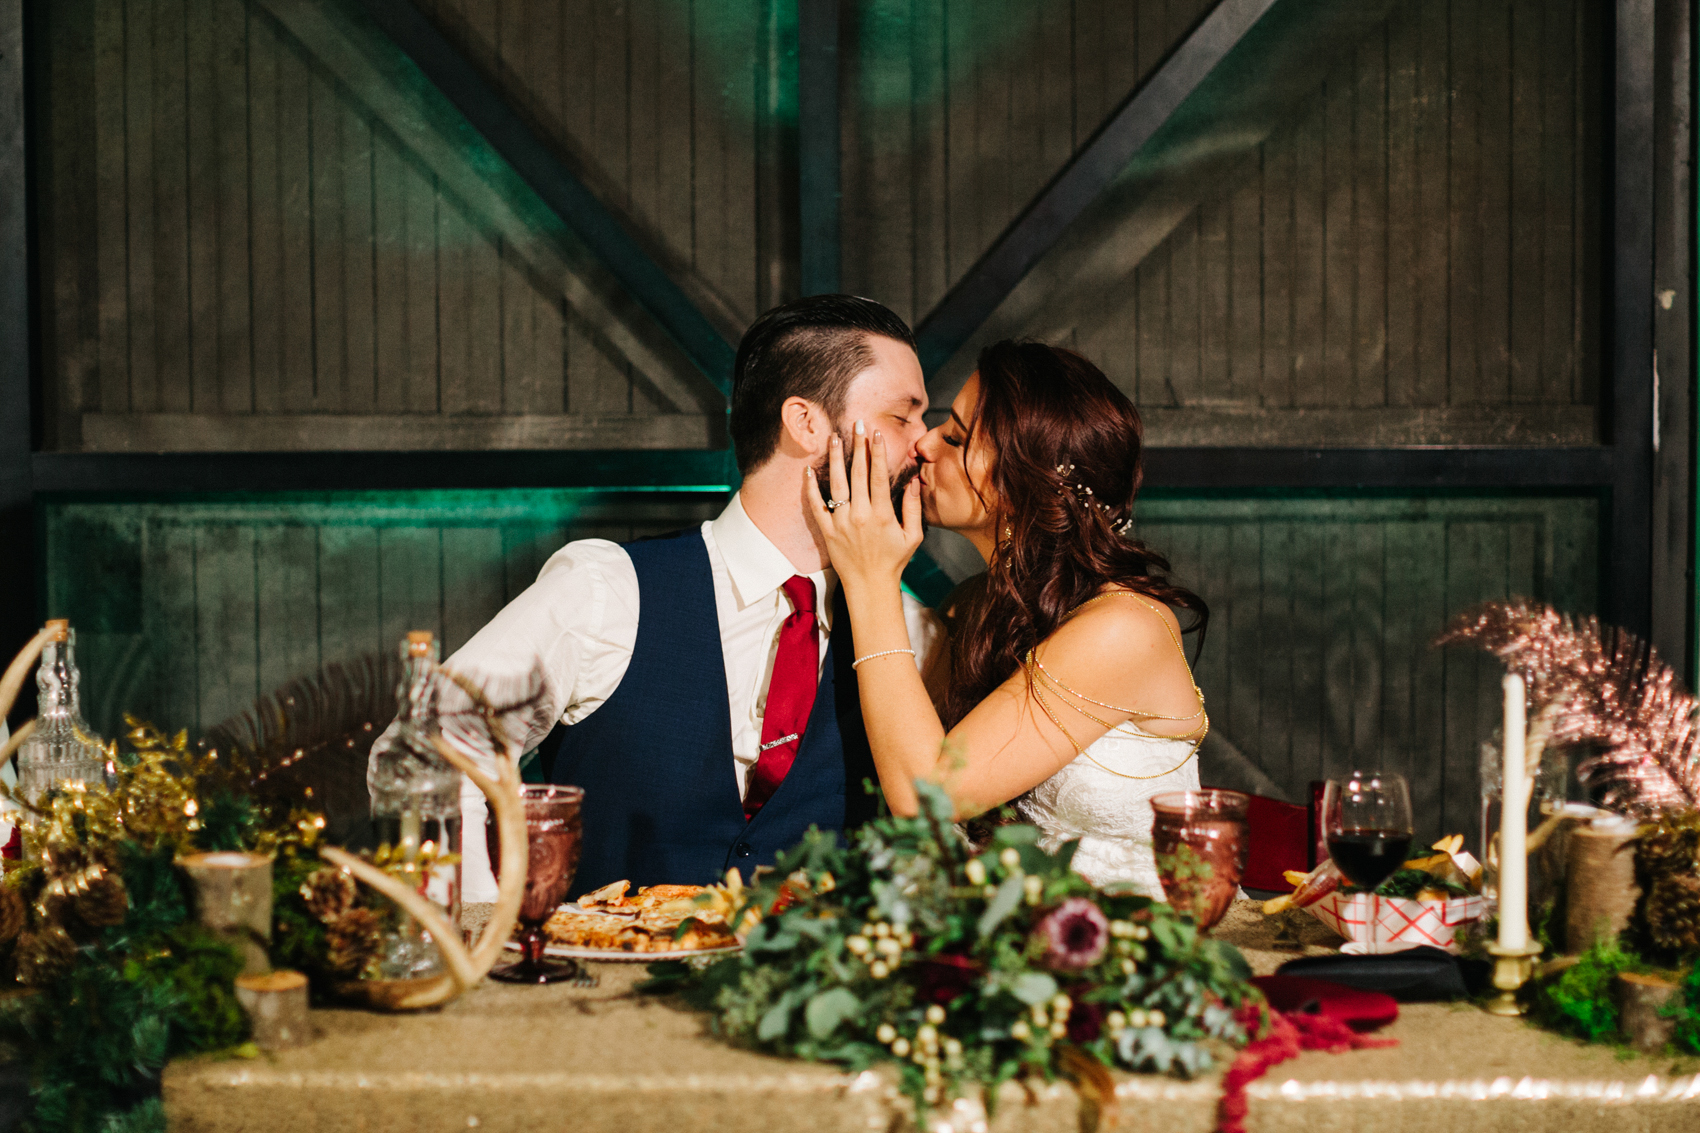 candid moment of the bride and groom kissing during the Orlando wedding reception